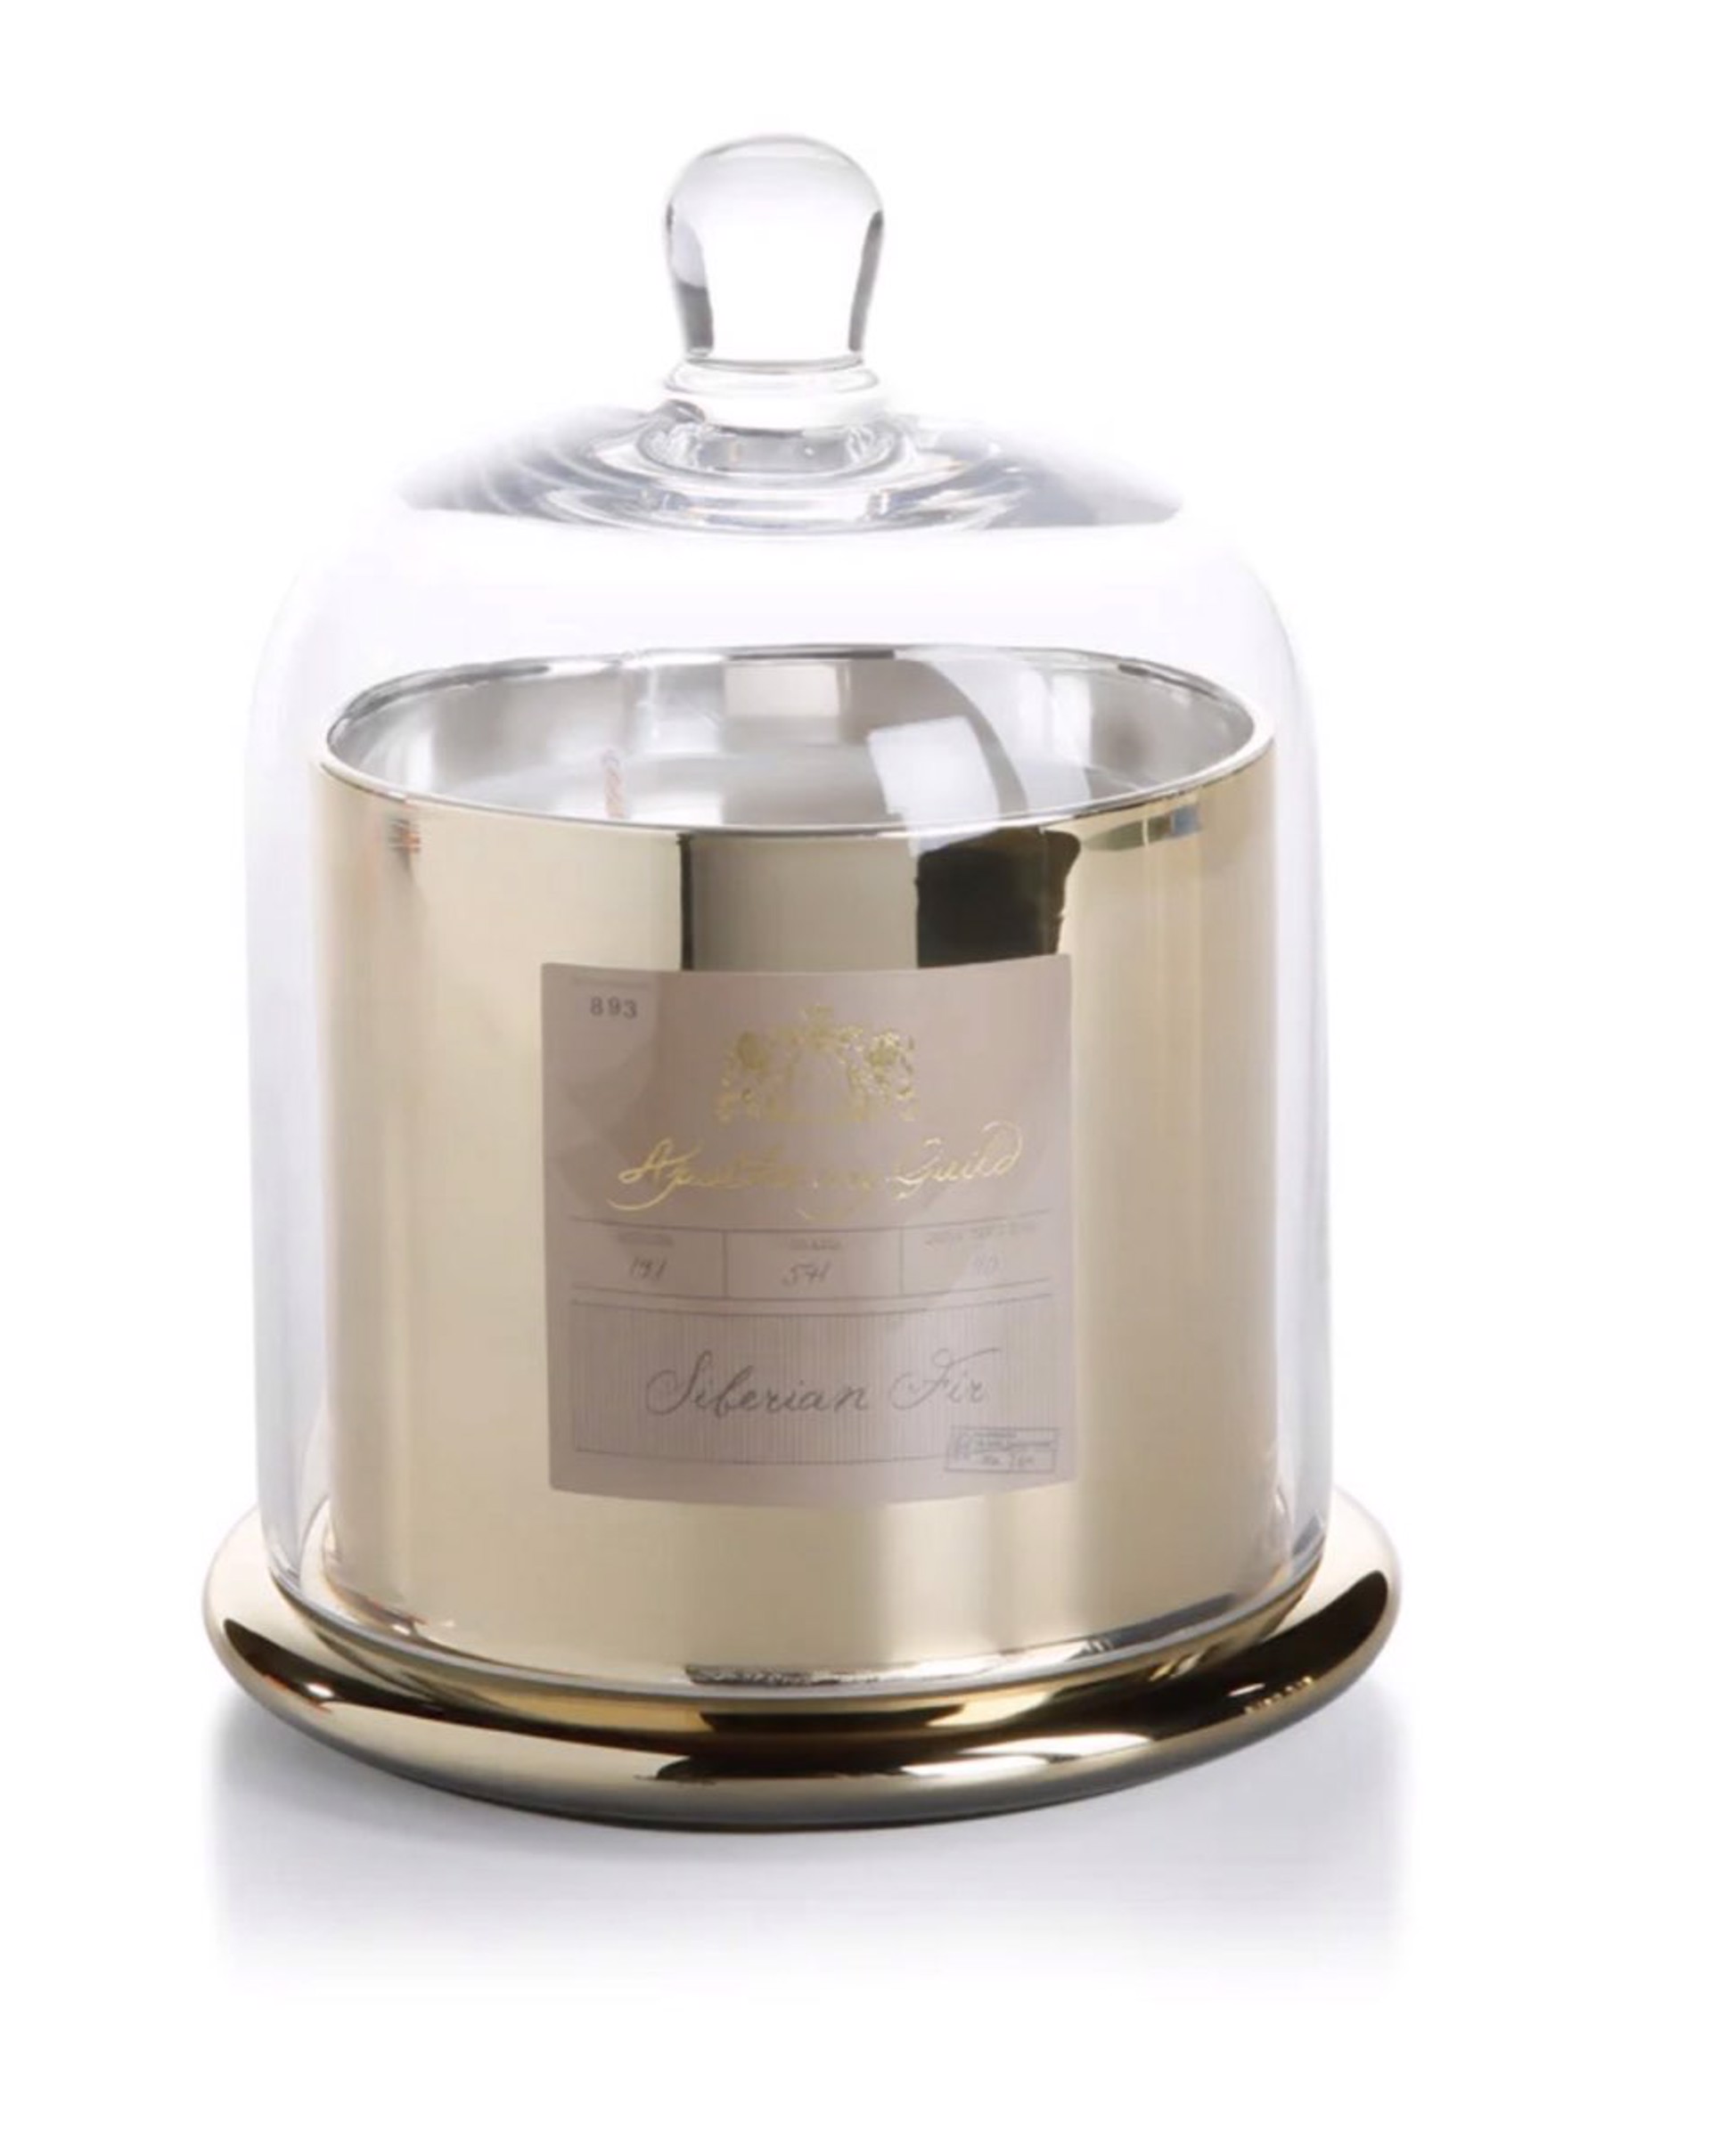 Apothecary Guild "Golden Beach" Candle with Glass Dome by Argent